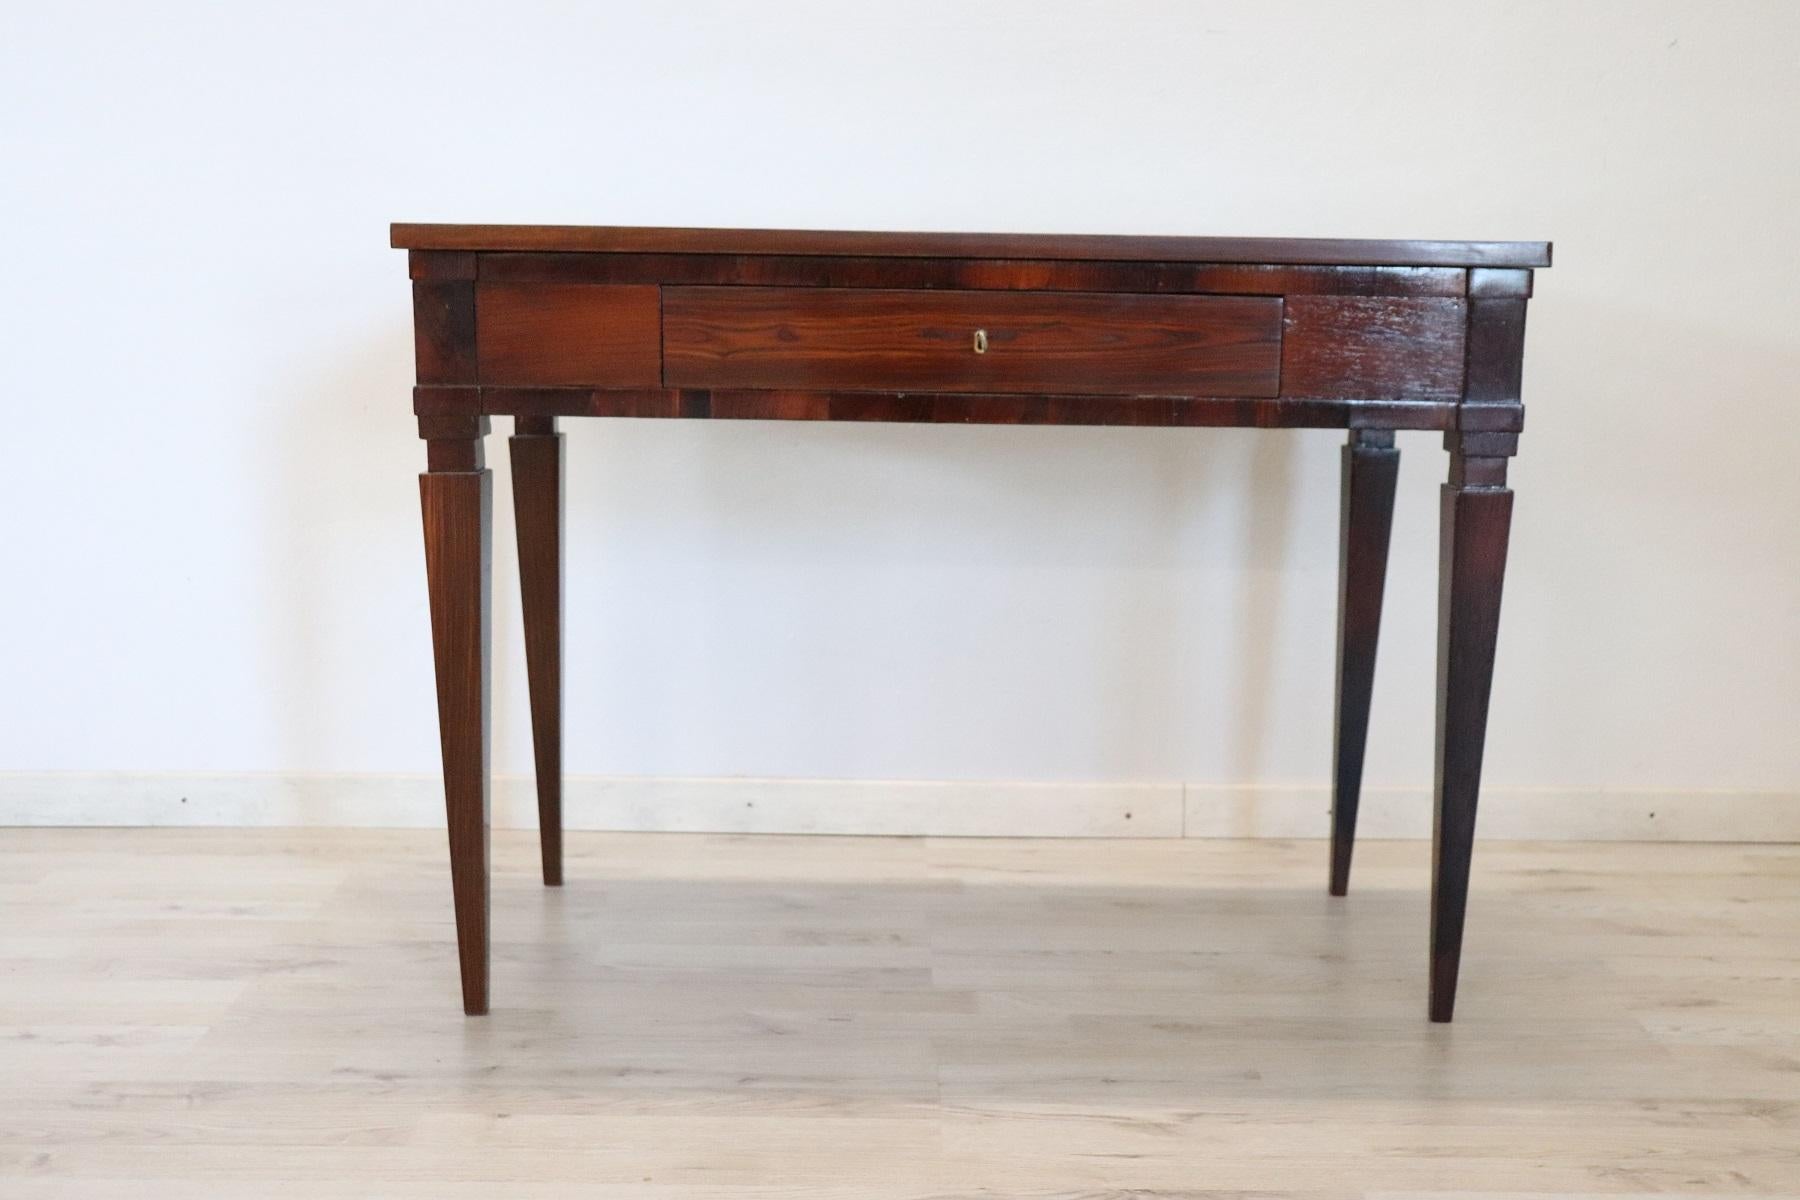 Elegant and essential antique Italian writing desk. Louis XVI period with Classic spiked legs. Present one drawer on the front. Rare and precious rosewood.
Perfect condition restored in the professional laboratory.